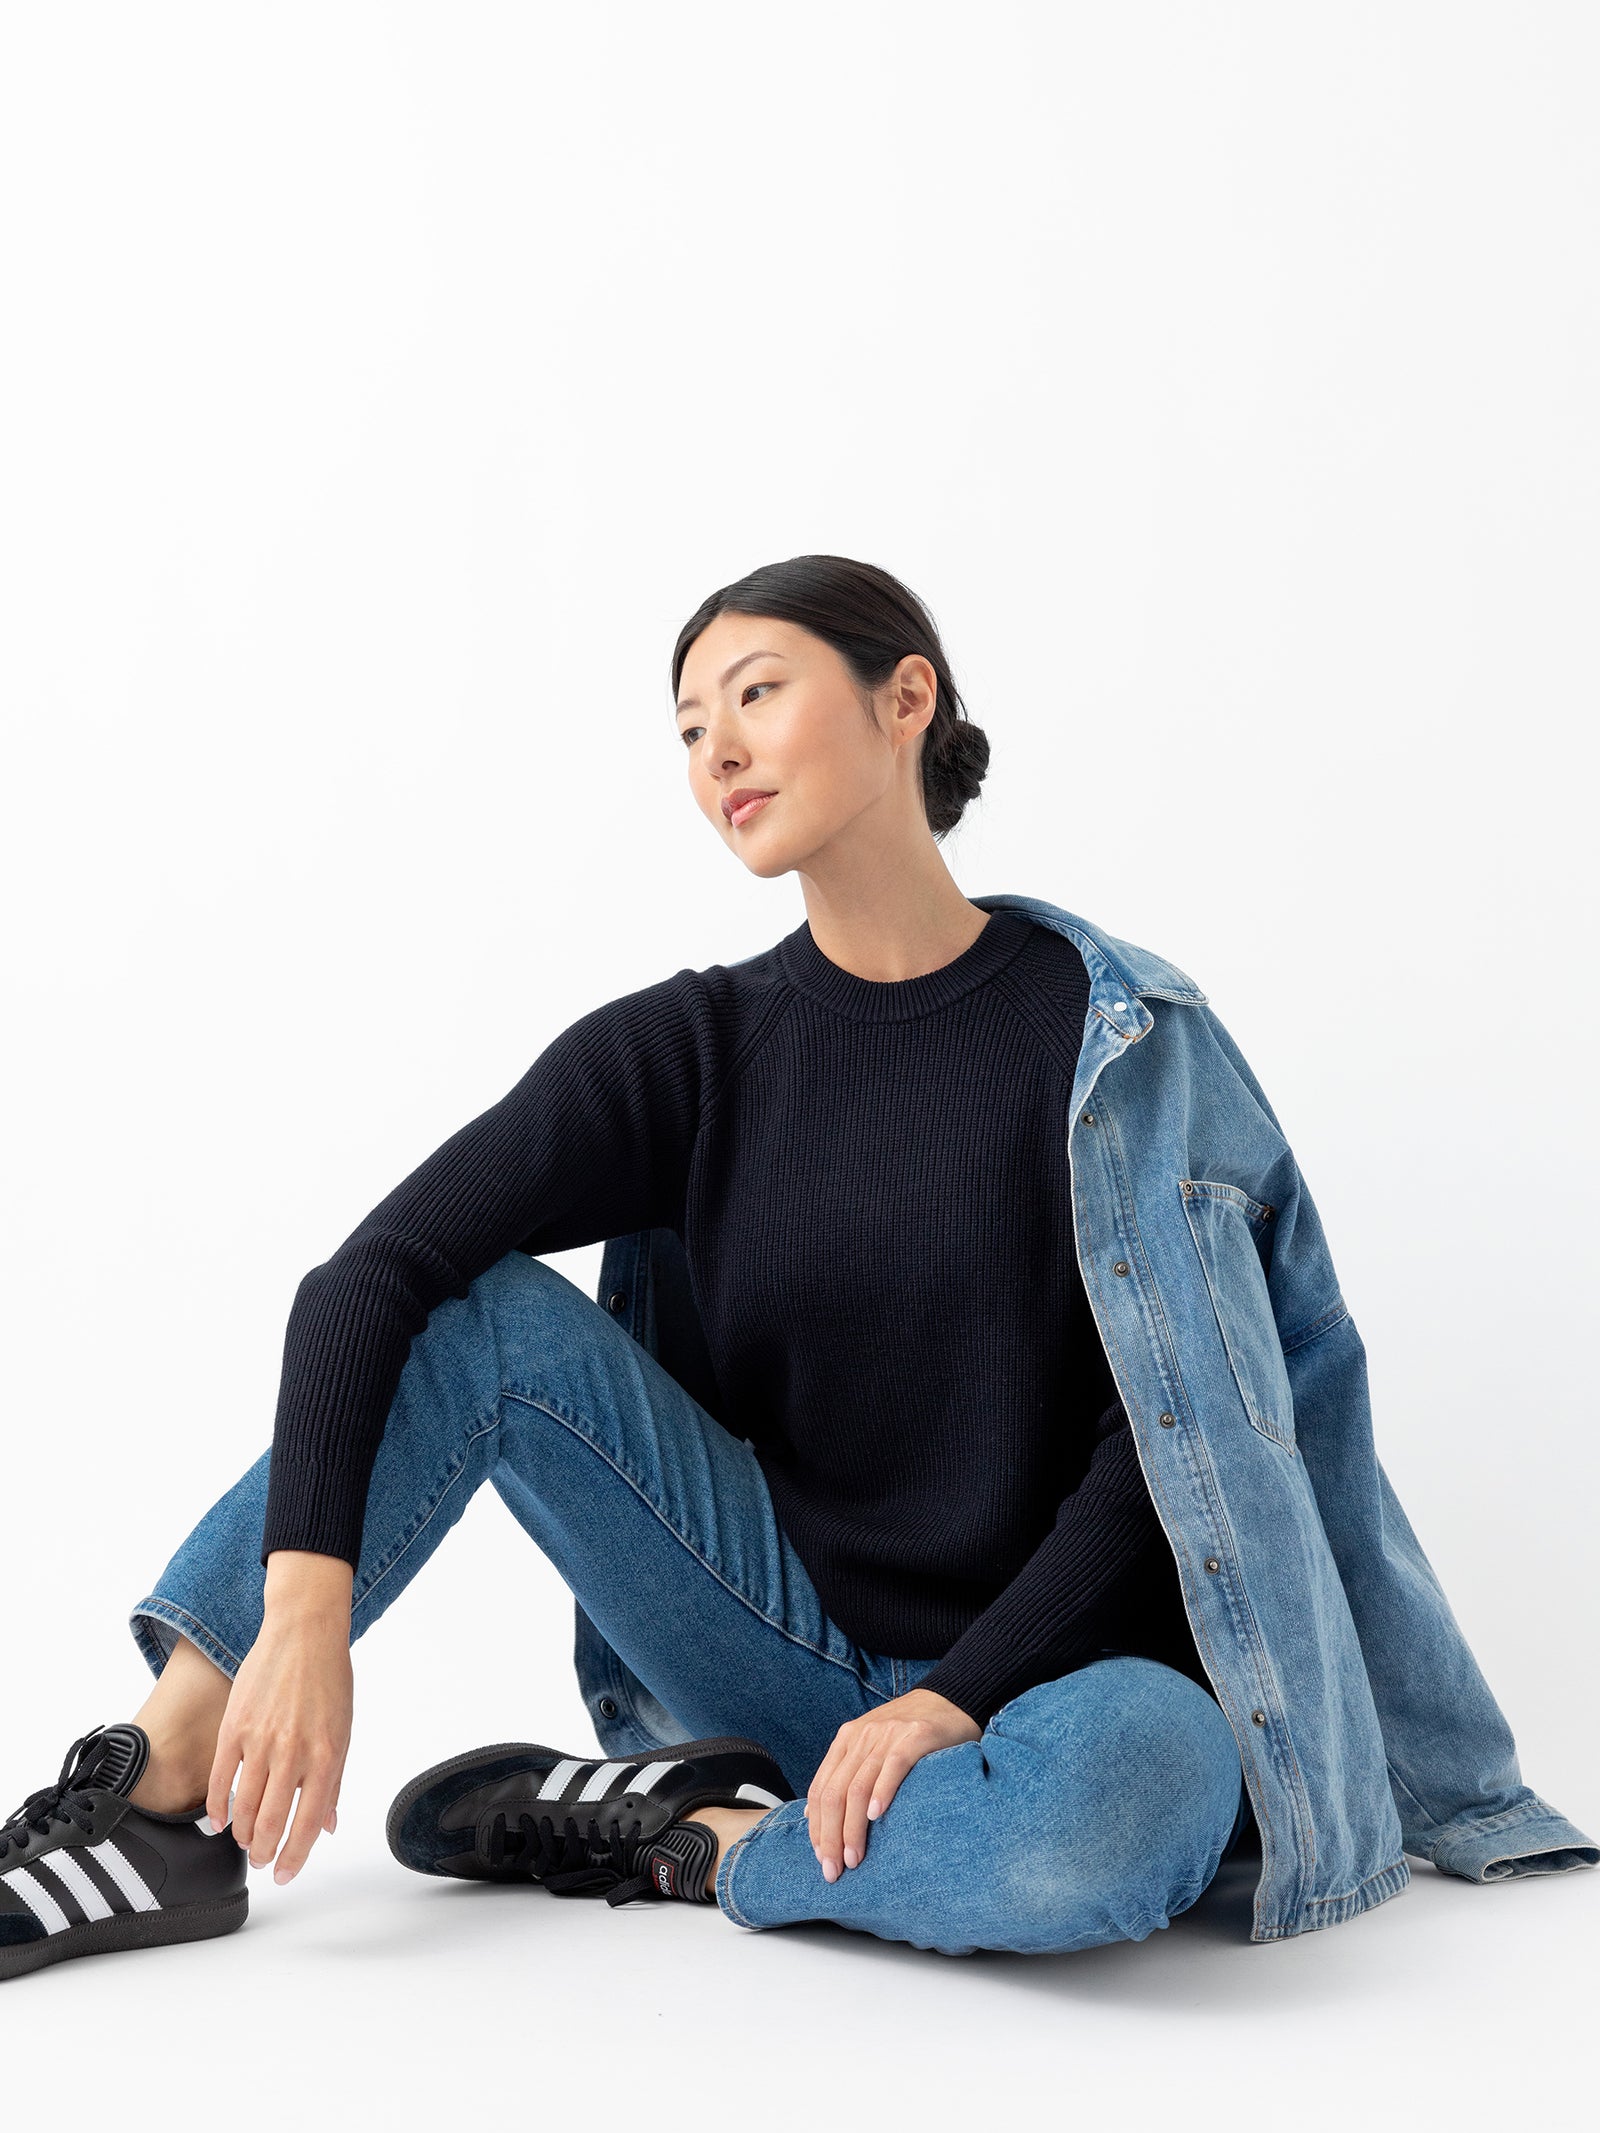 A person with long black hair, wearing Cozy Earth's Women's Classic Crewneck in black along with blue jeans and black sneakers featuring white stripes, sits on the floor with one leg bent. They have a denim jacket draped over their shoulder and gaze off to the side against a plain white background. 